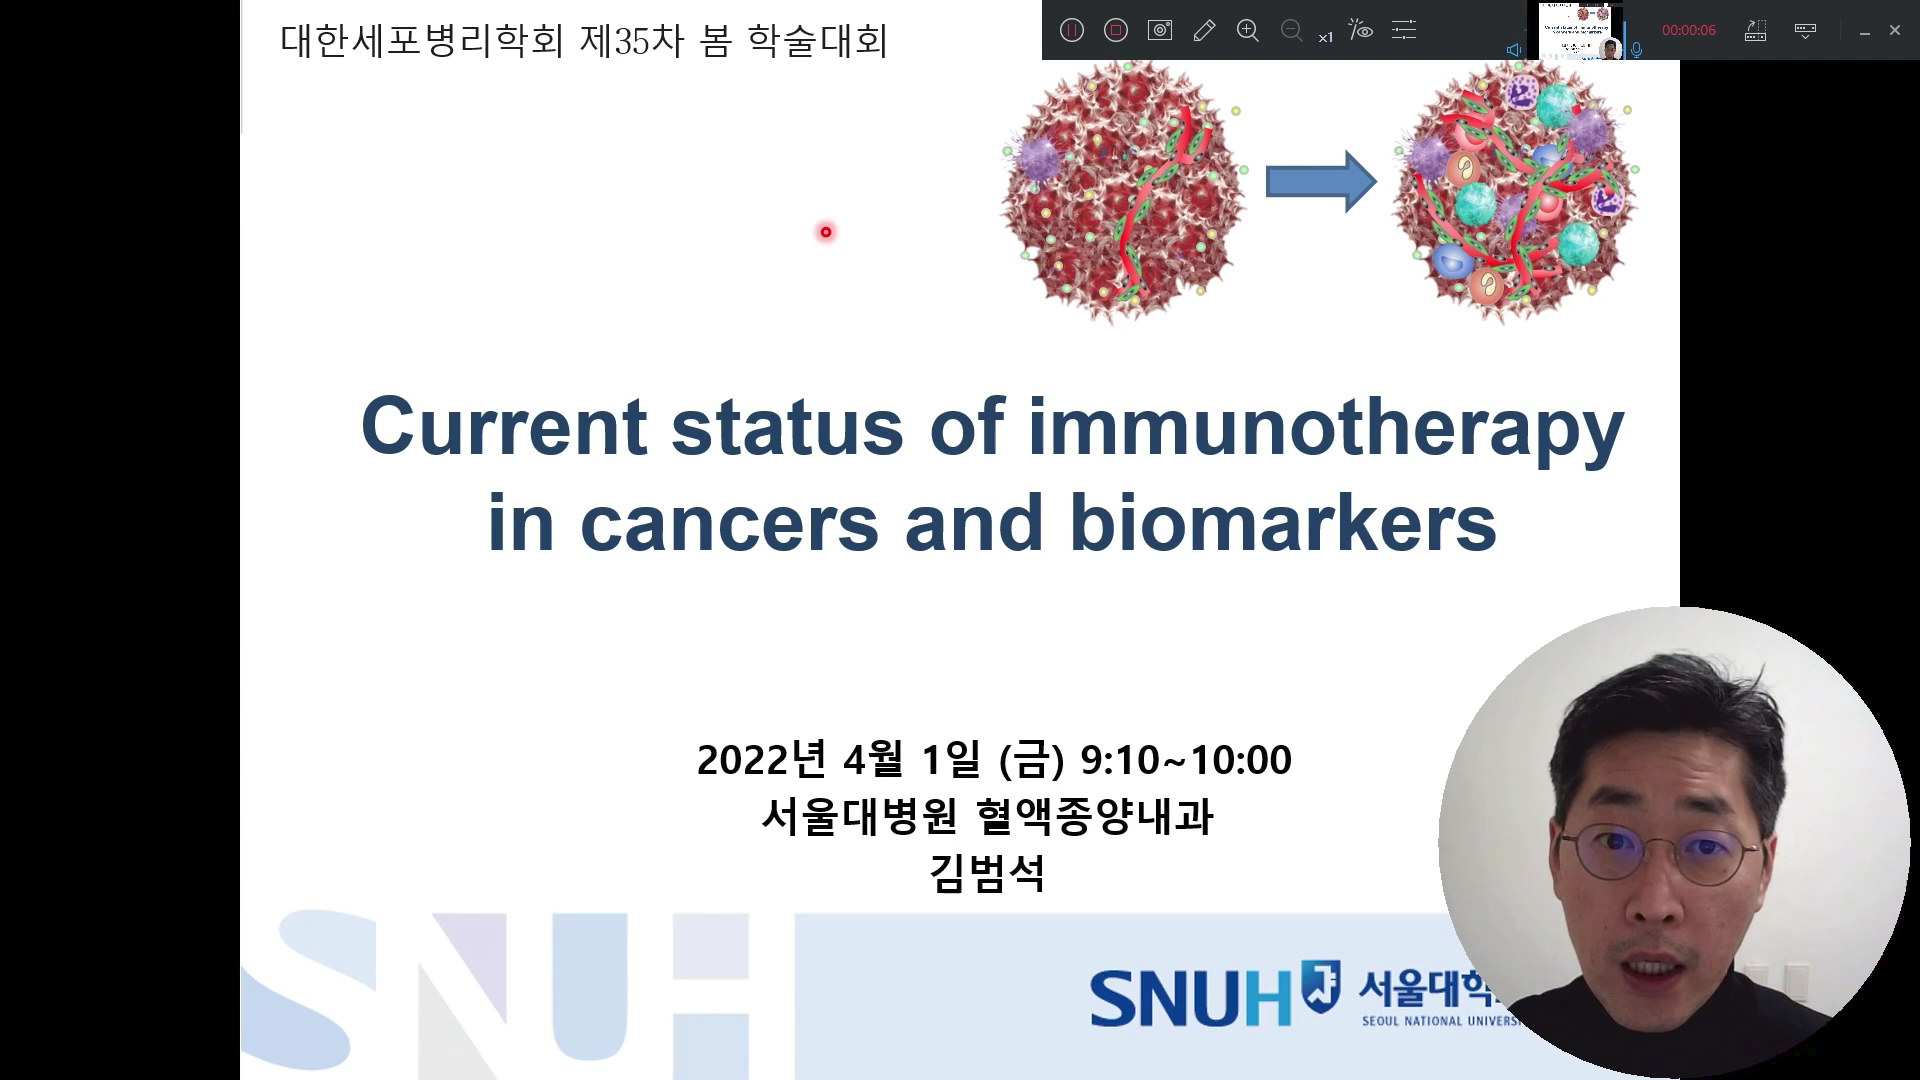 Current status of immunotherapy in cancers and biomarkers